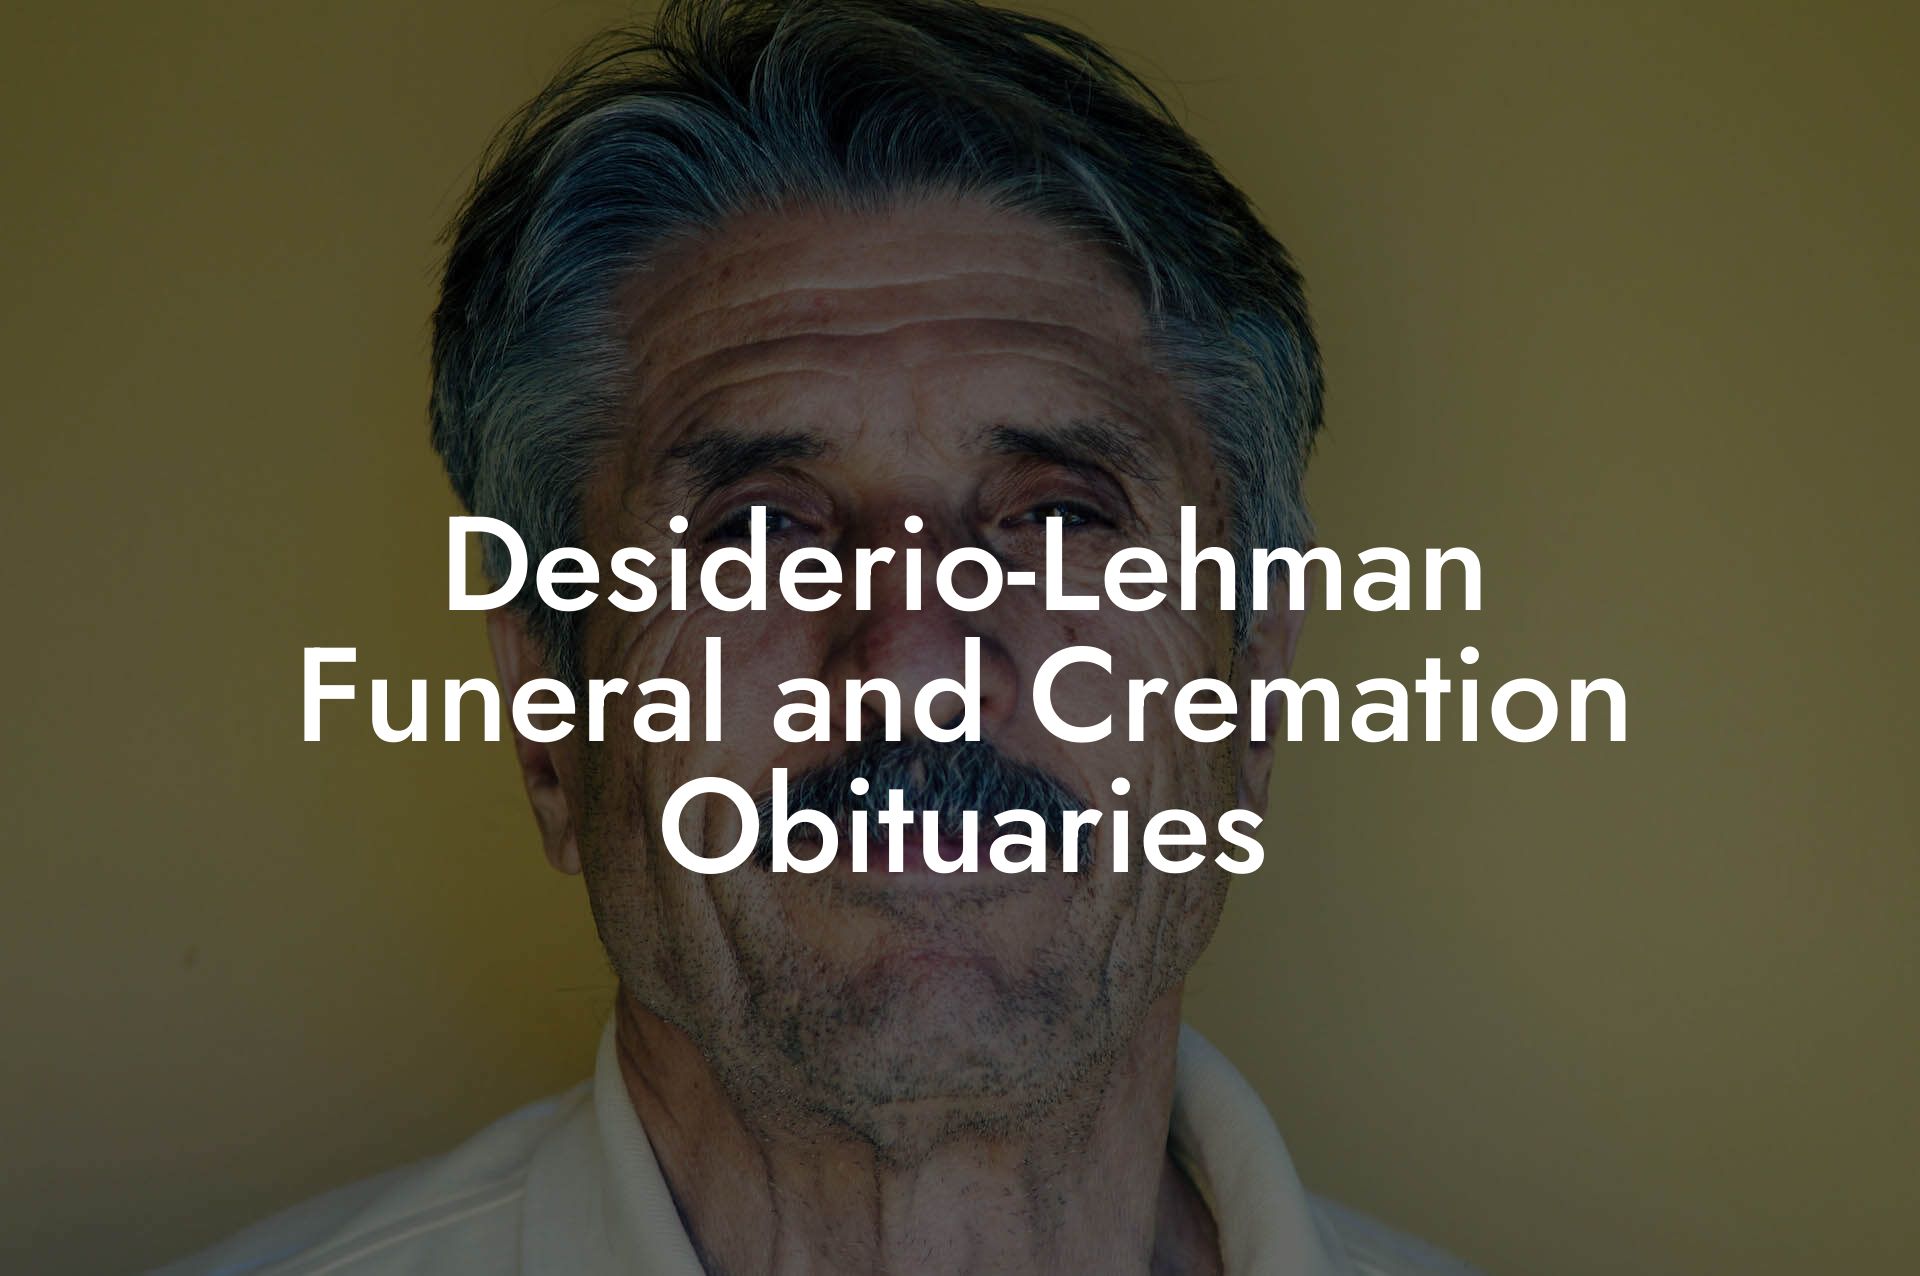 Desiderio-Lehman Funeral and Cremation Obituaries